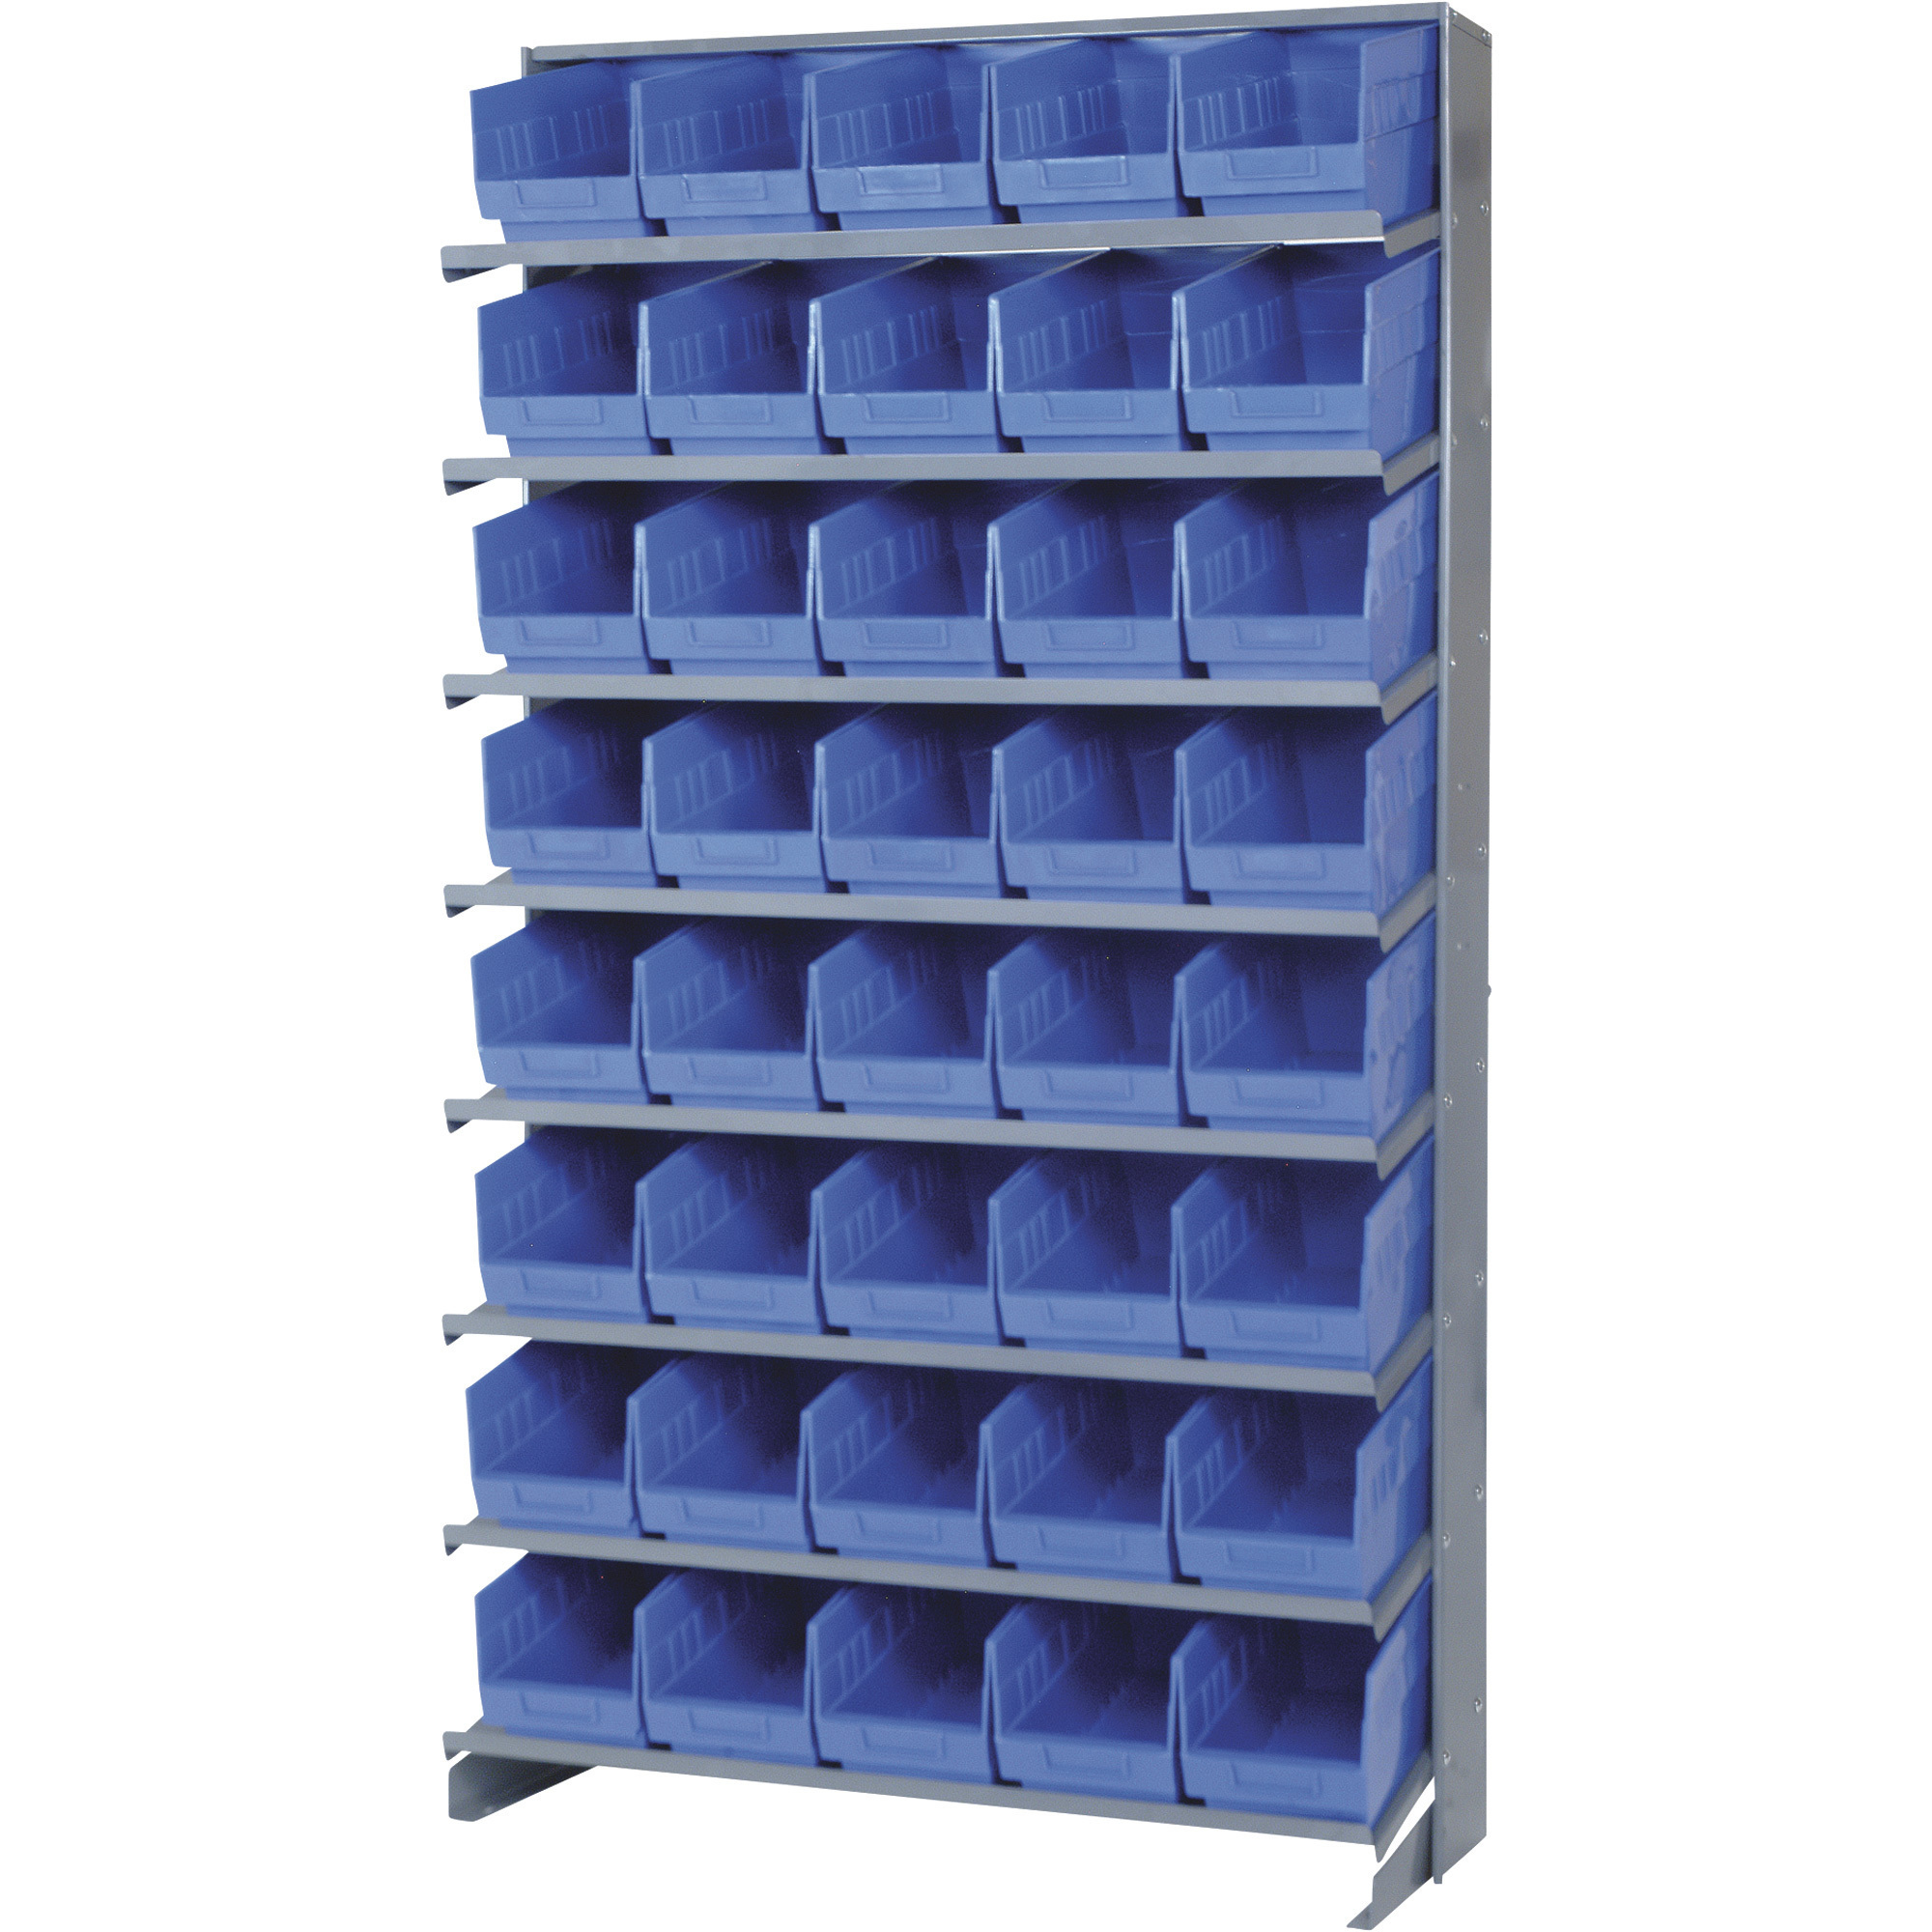 Quantum Storage Store-More Single Side Sloped Shelving Unit With 40 Bins, 36Inch W x 12Inch D x 60Inch H, Blue, Model QPRS-202BL